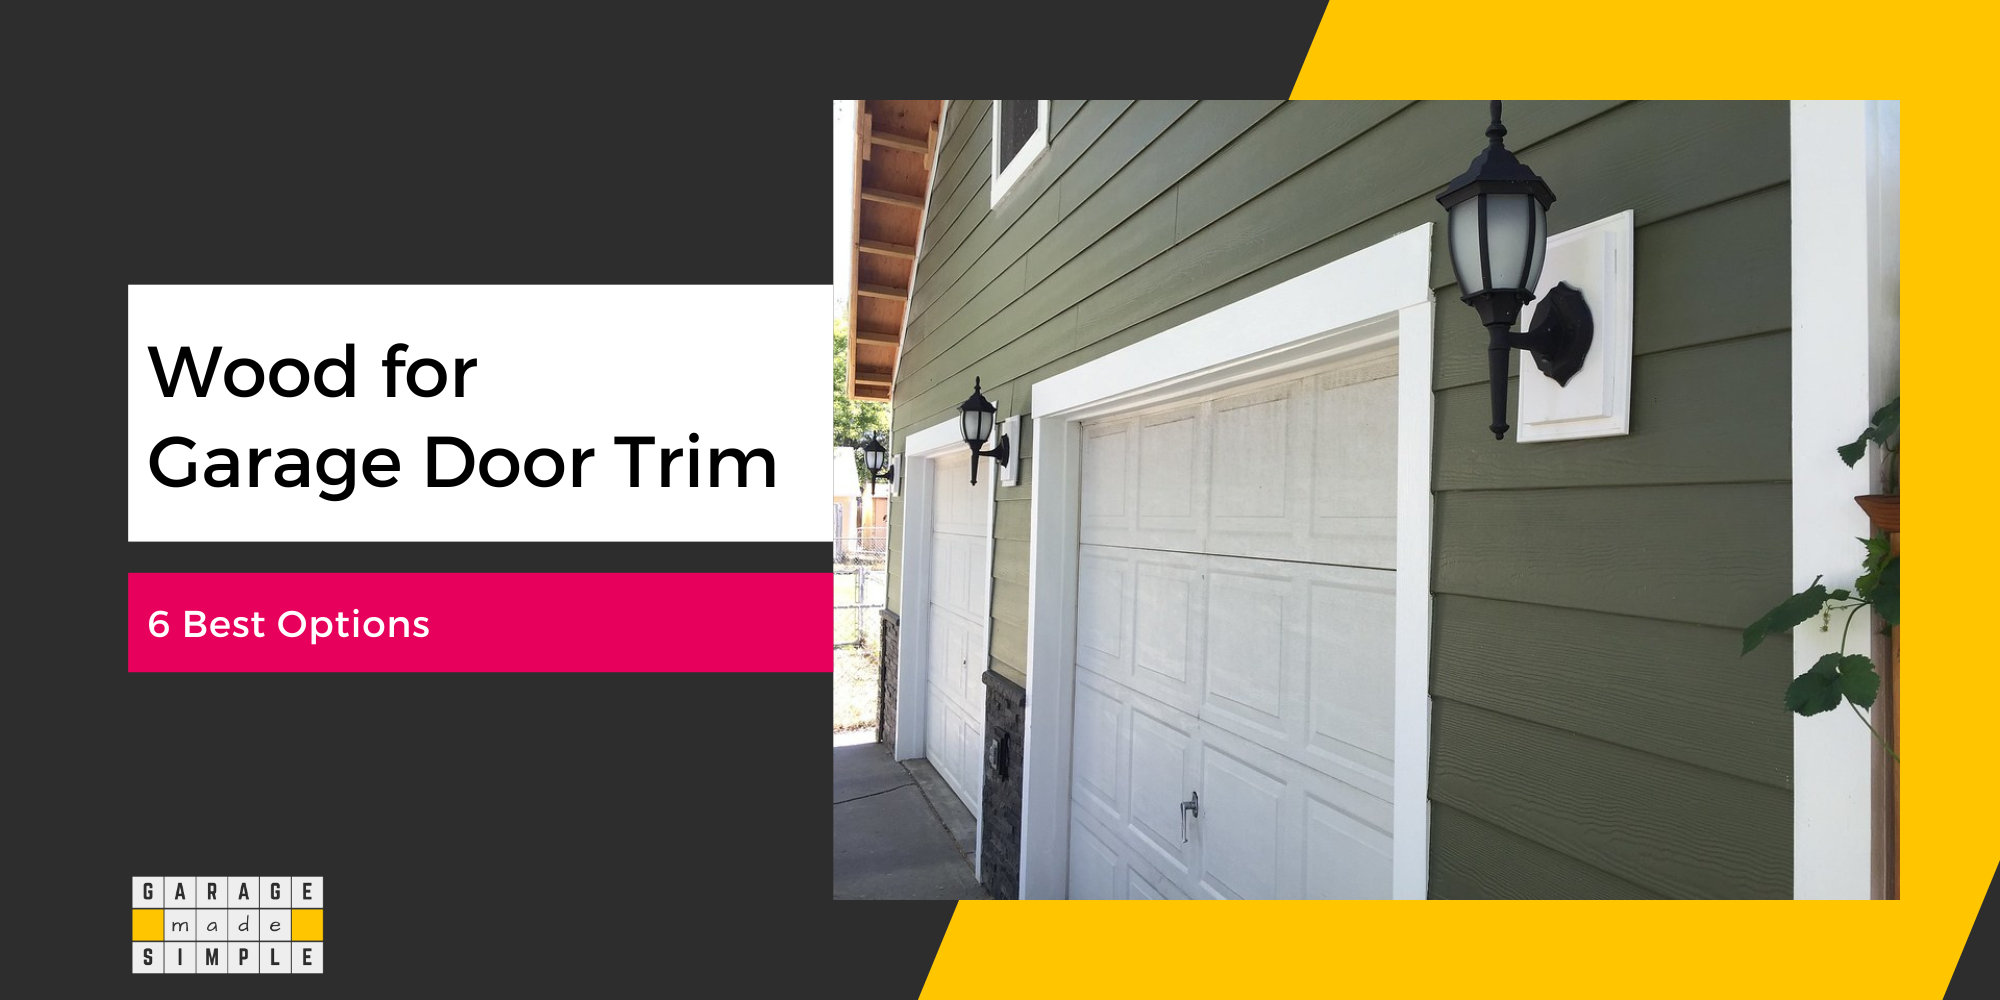 What Kind of Wood to Use for Garage Door Trim? (6 Best Options)